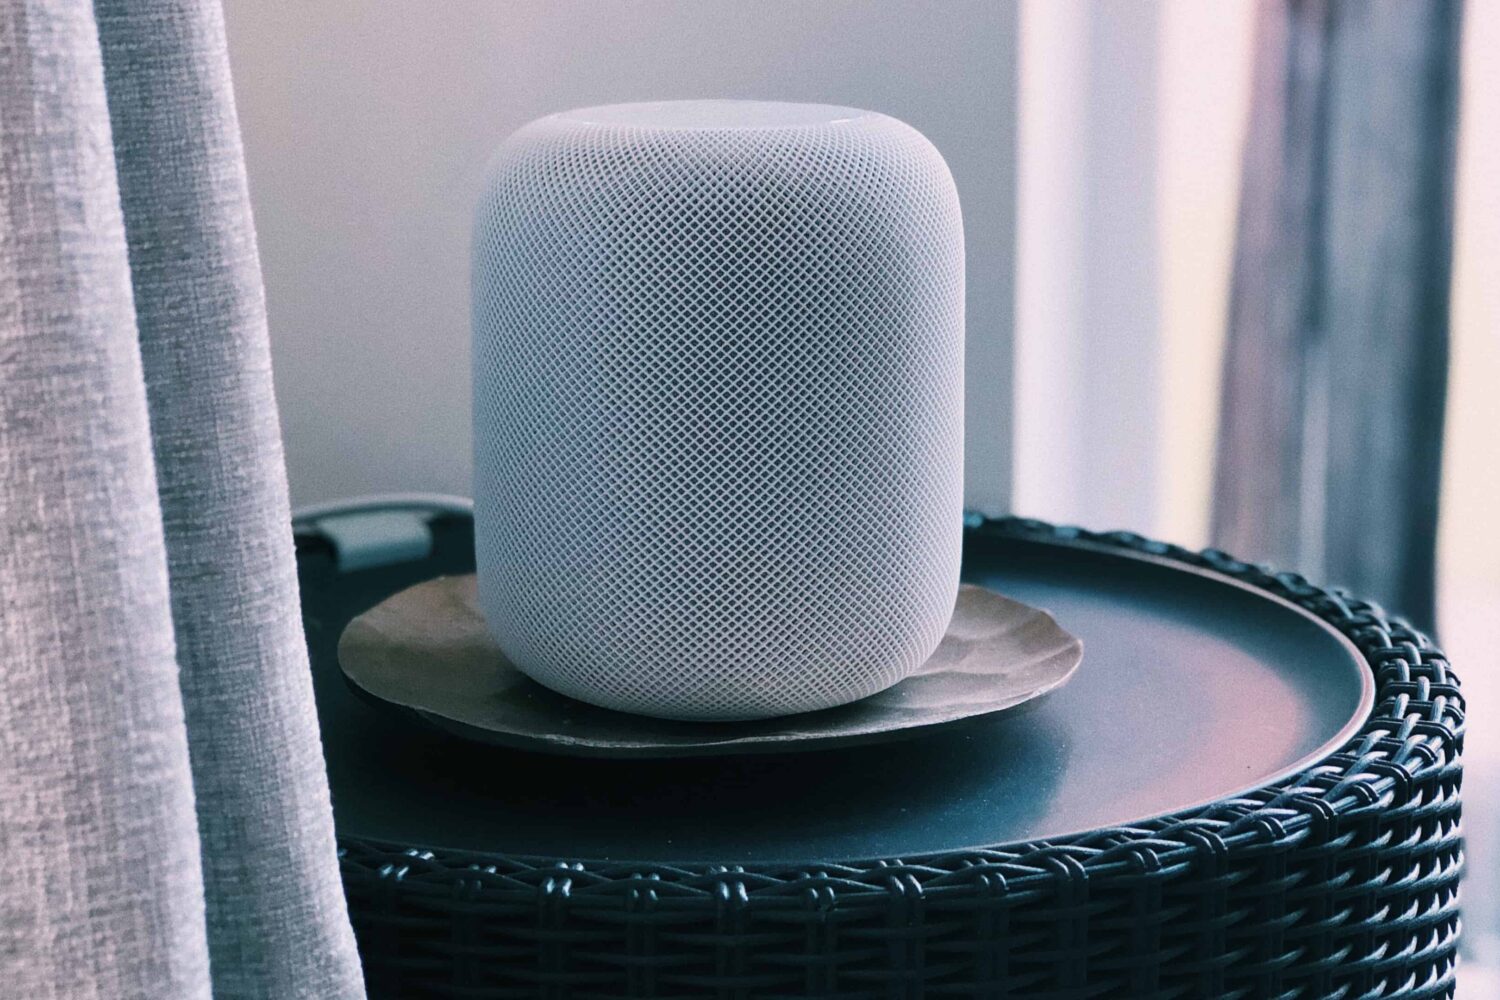 A silver version of Apple's full-size HomePod wireless speaker is shown sitting on a table in this photo from Unsplash